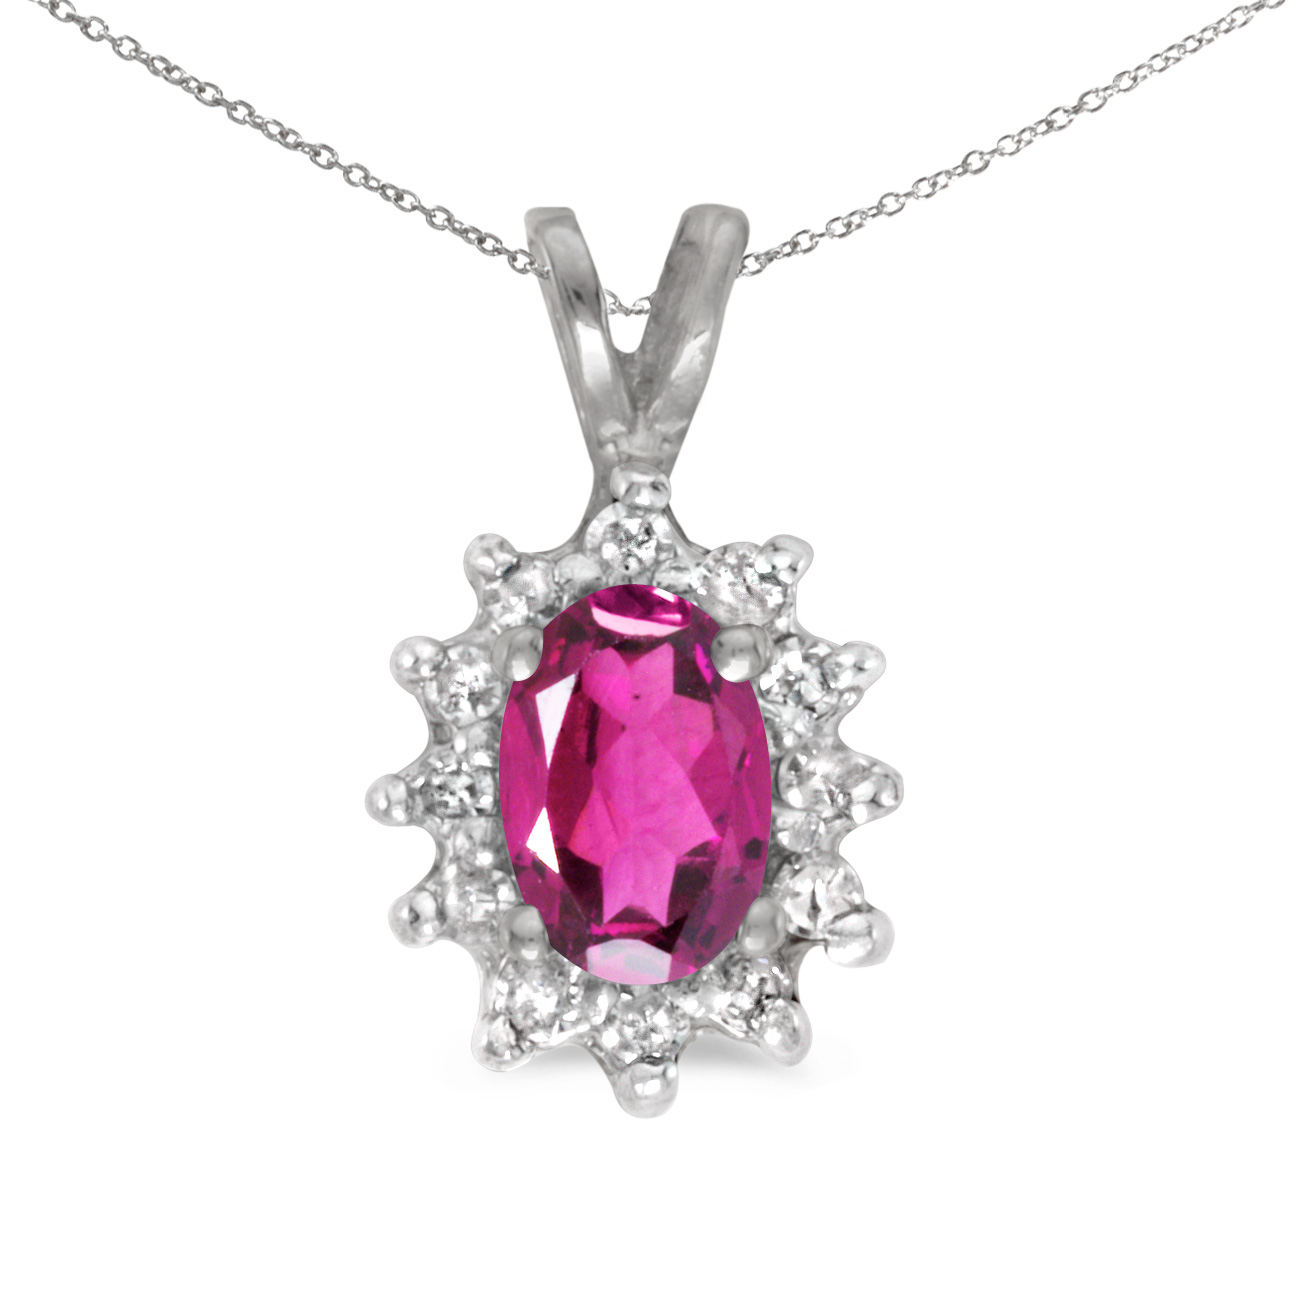 This 14k white gold oval pink topaz and diamond pendant features a 6x4 mm genuine natural pink to...